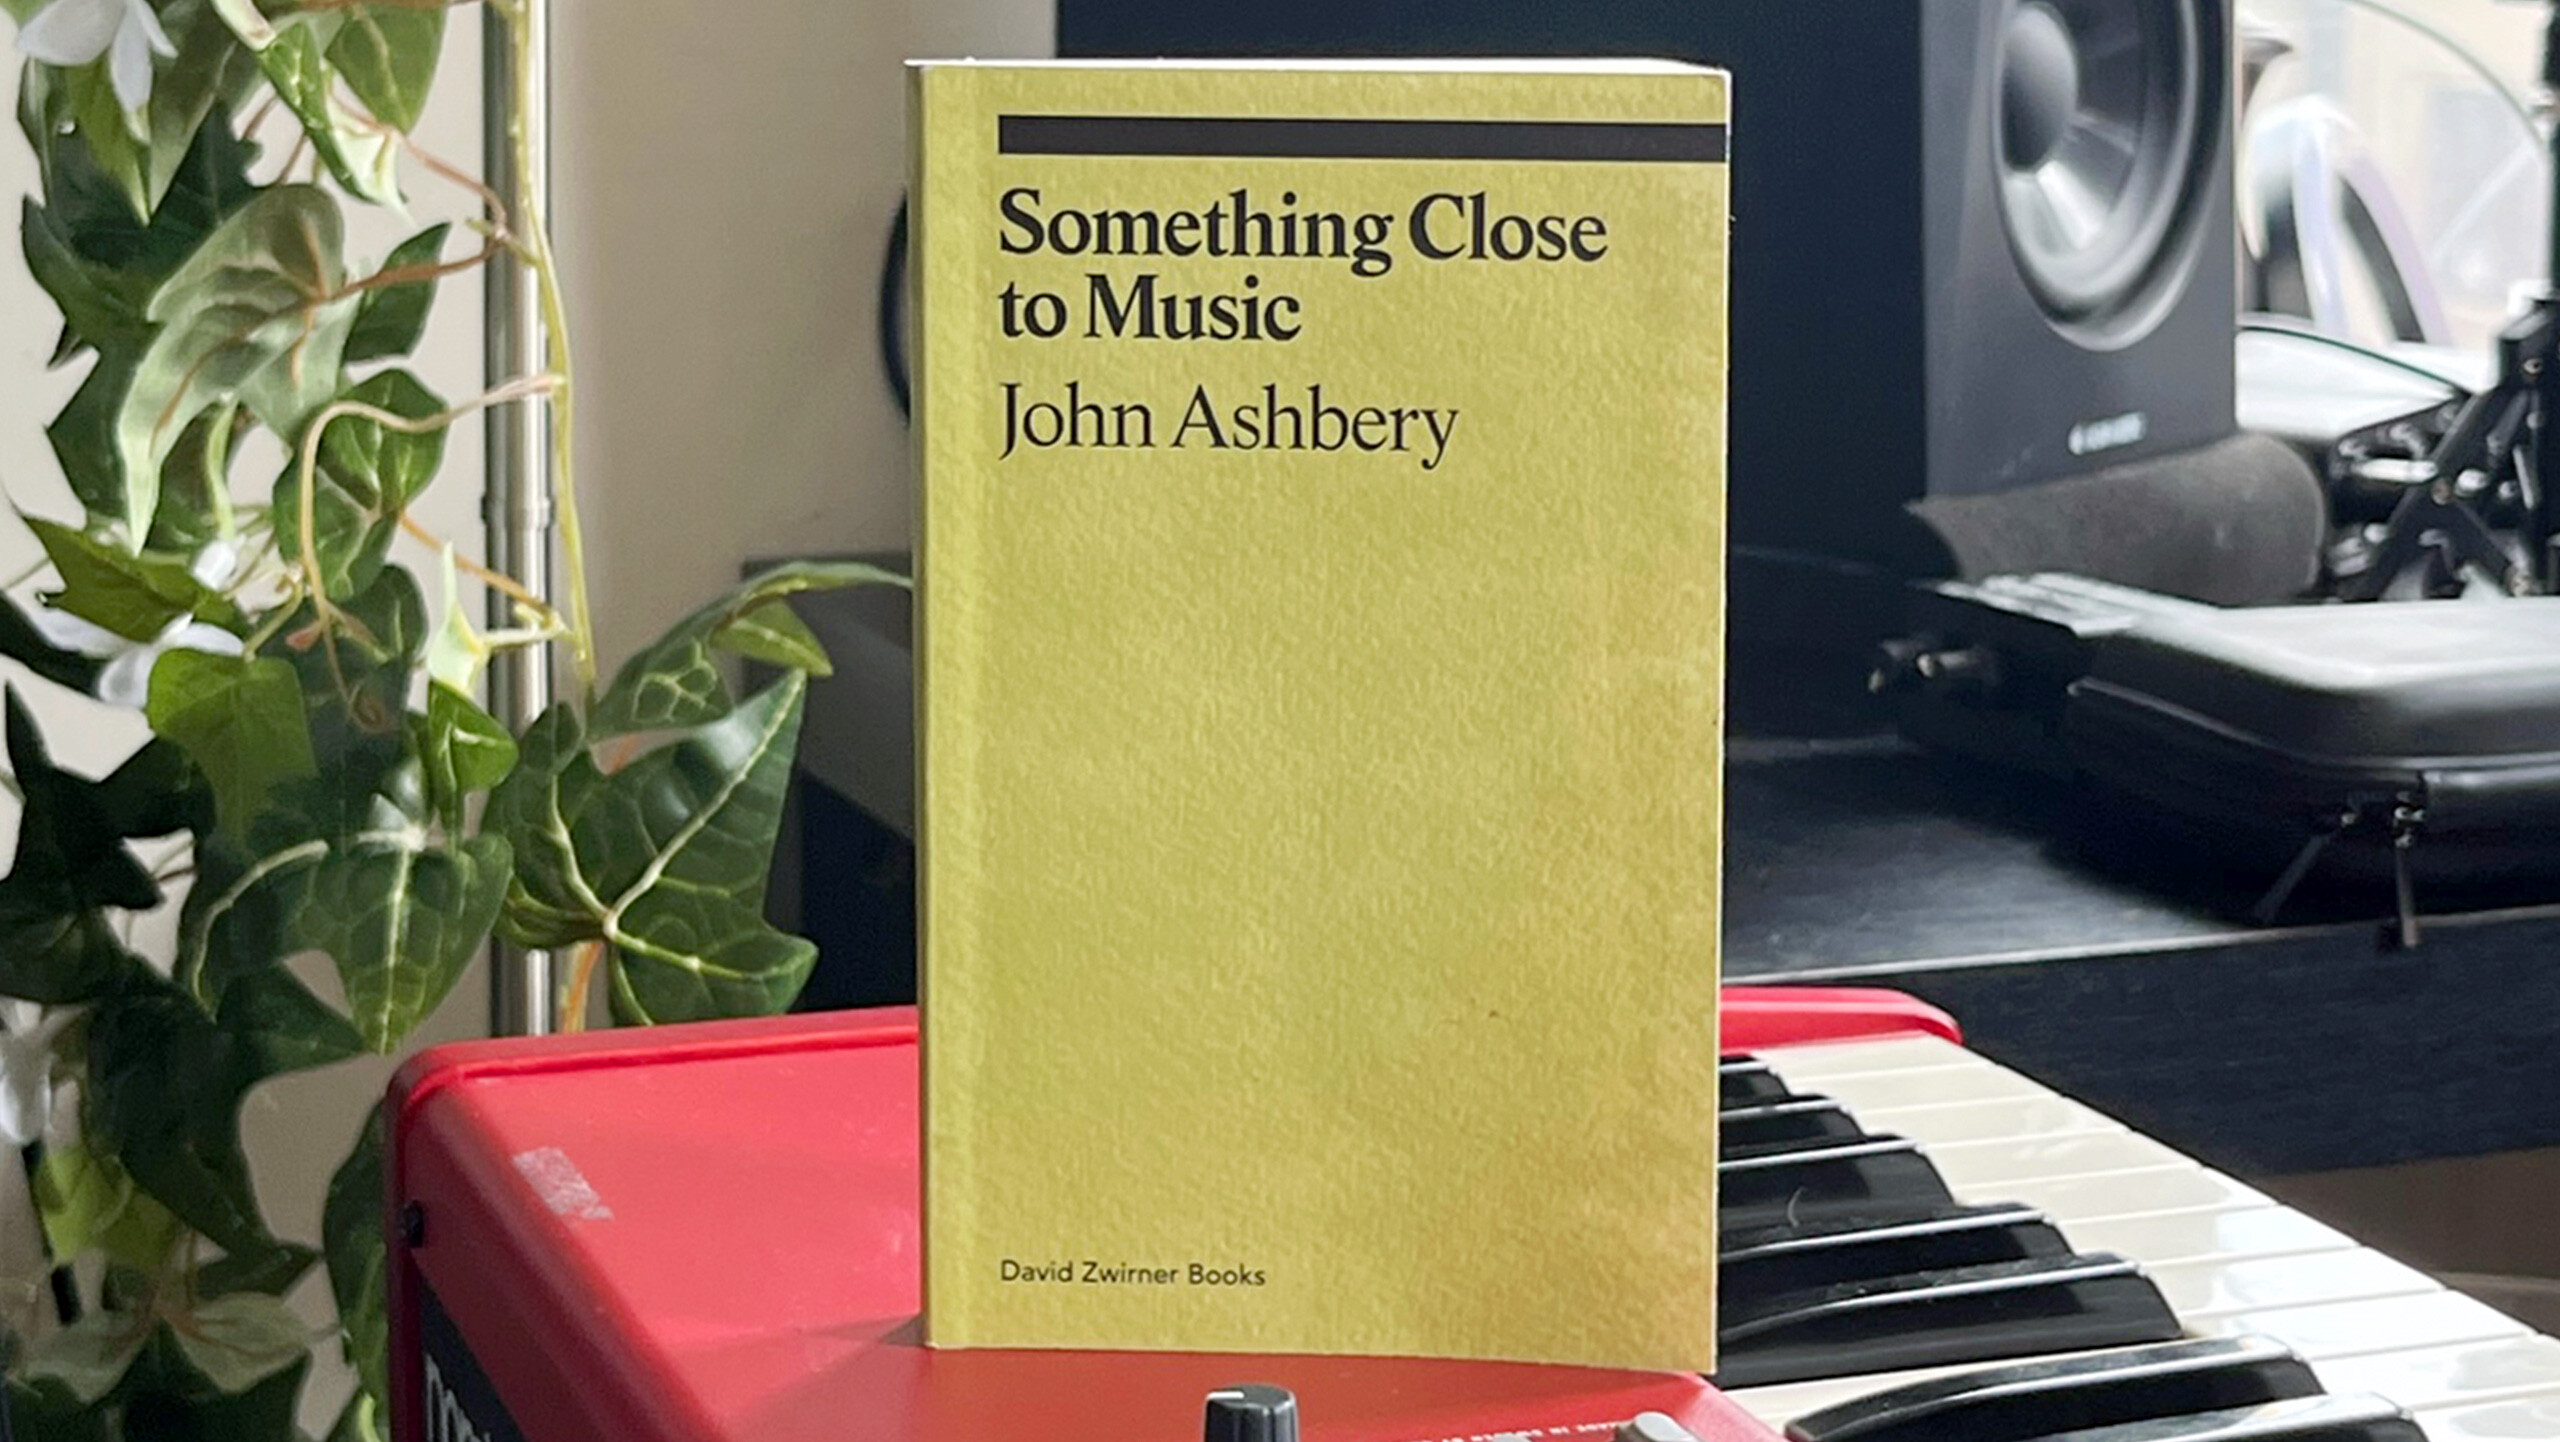 A photo of a book by John Ashbery, titled Something Close to Music: Late Art Writings, Poems, and Playlists, published by David Zwirner Books in 2022.